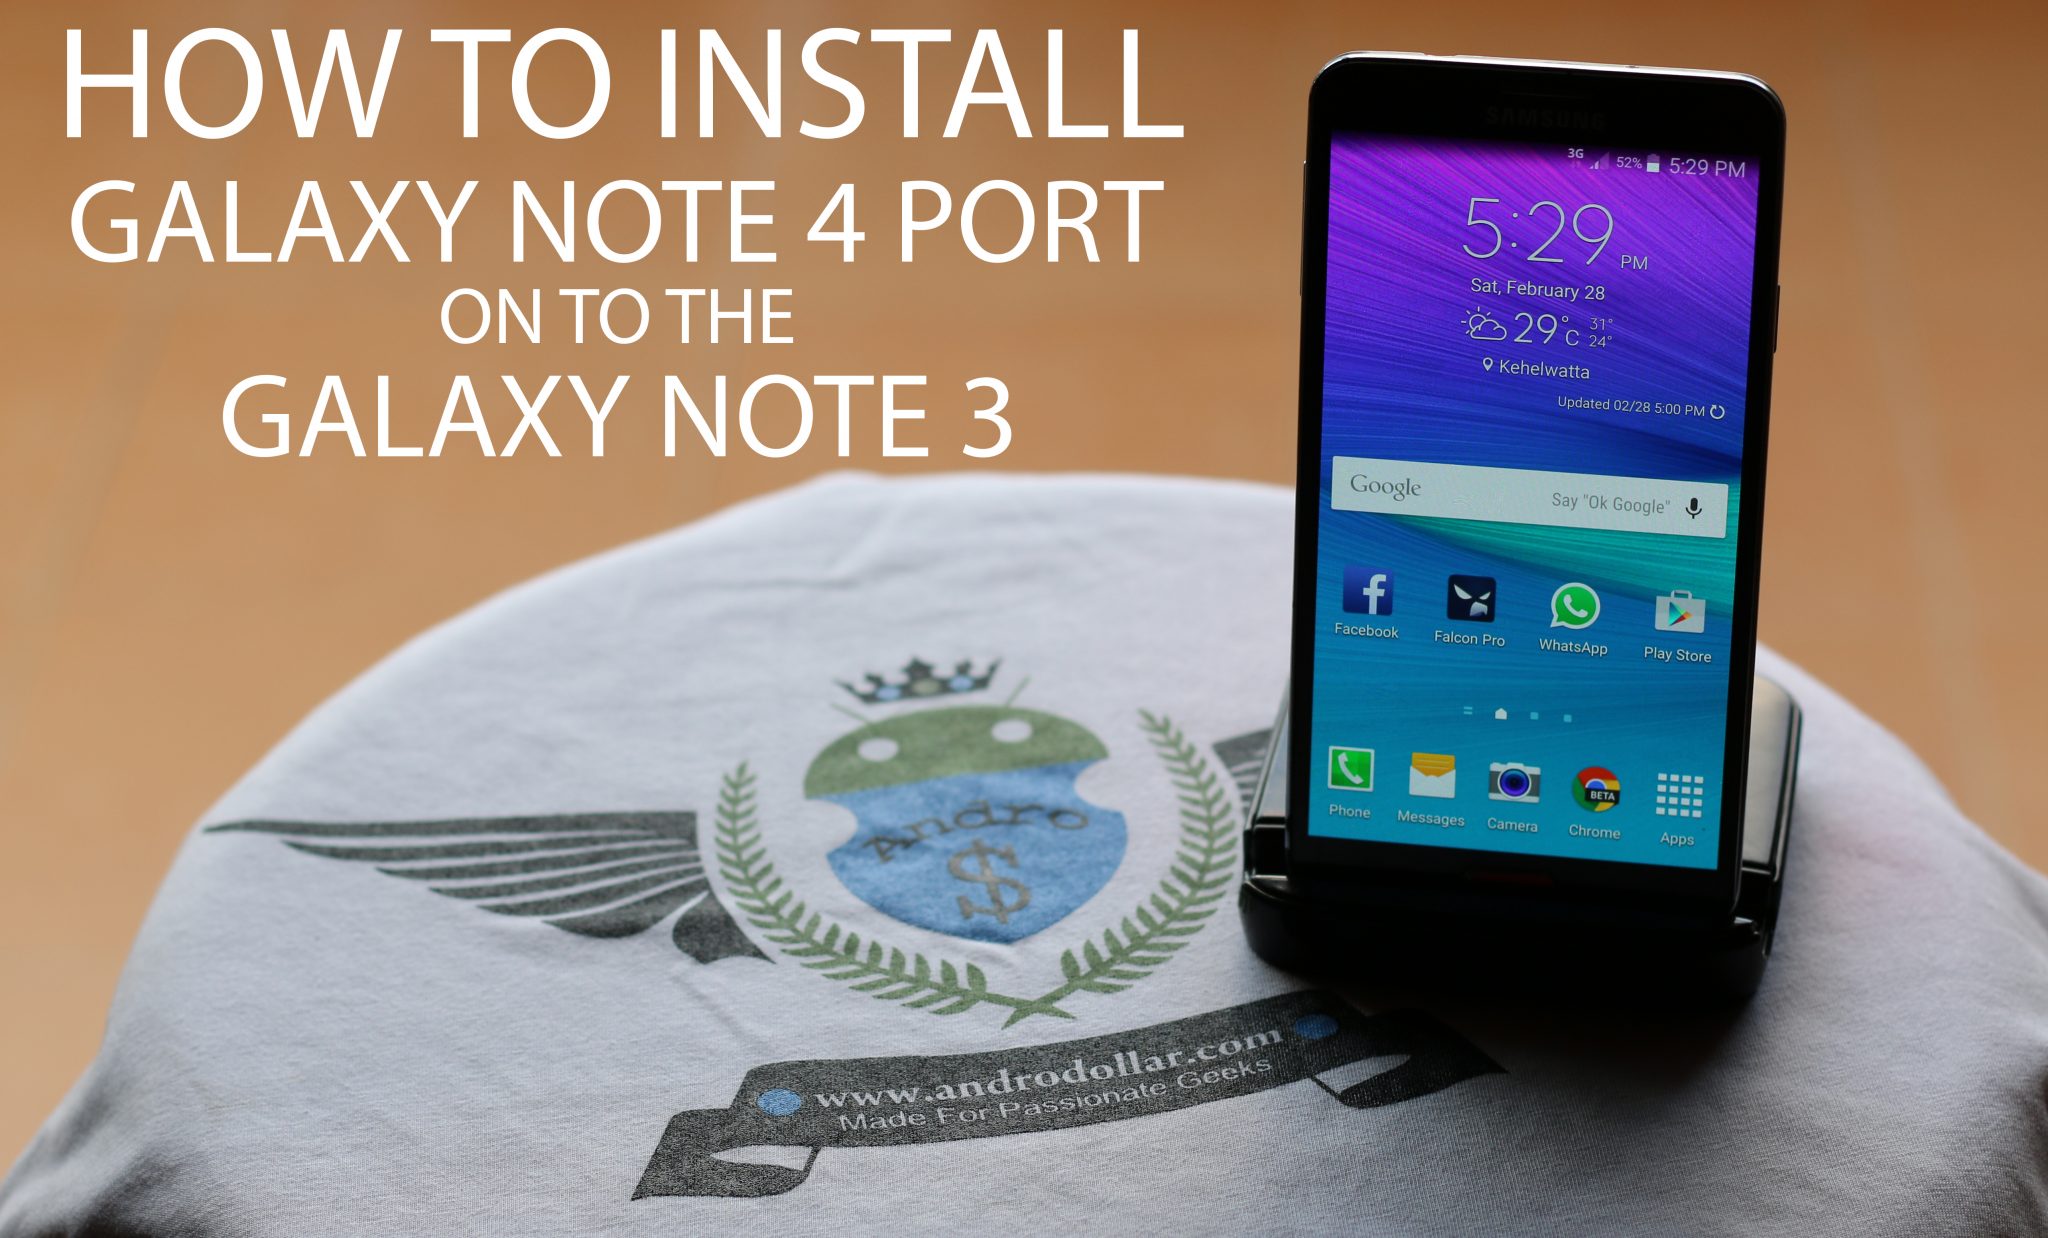 Tweaked Ported Galaxy Note 4 Lollipop Rom for Galaxy Note 3 – Andro Dollar